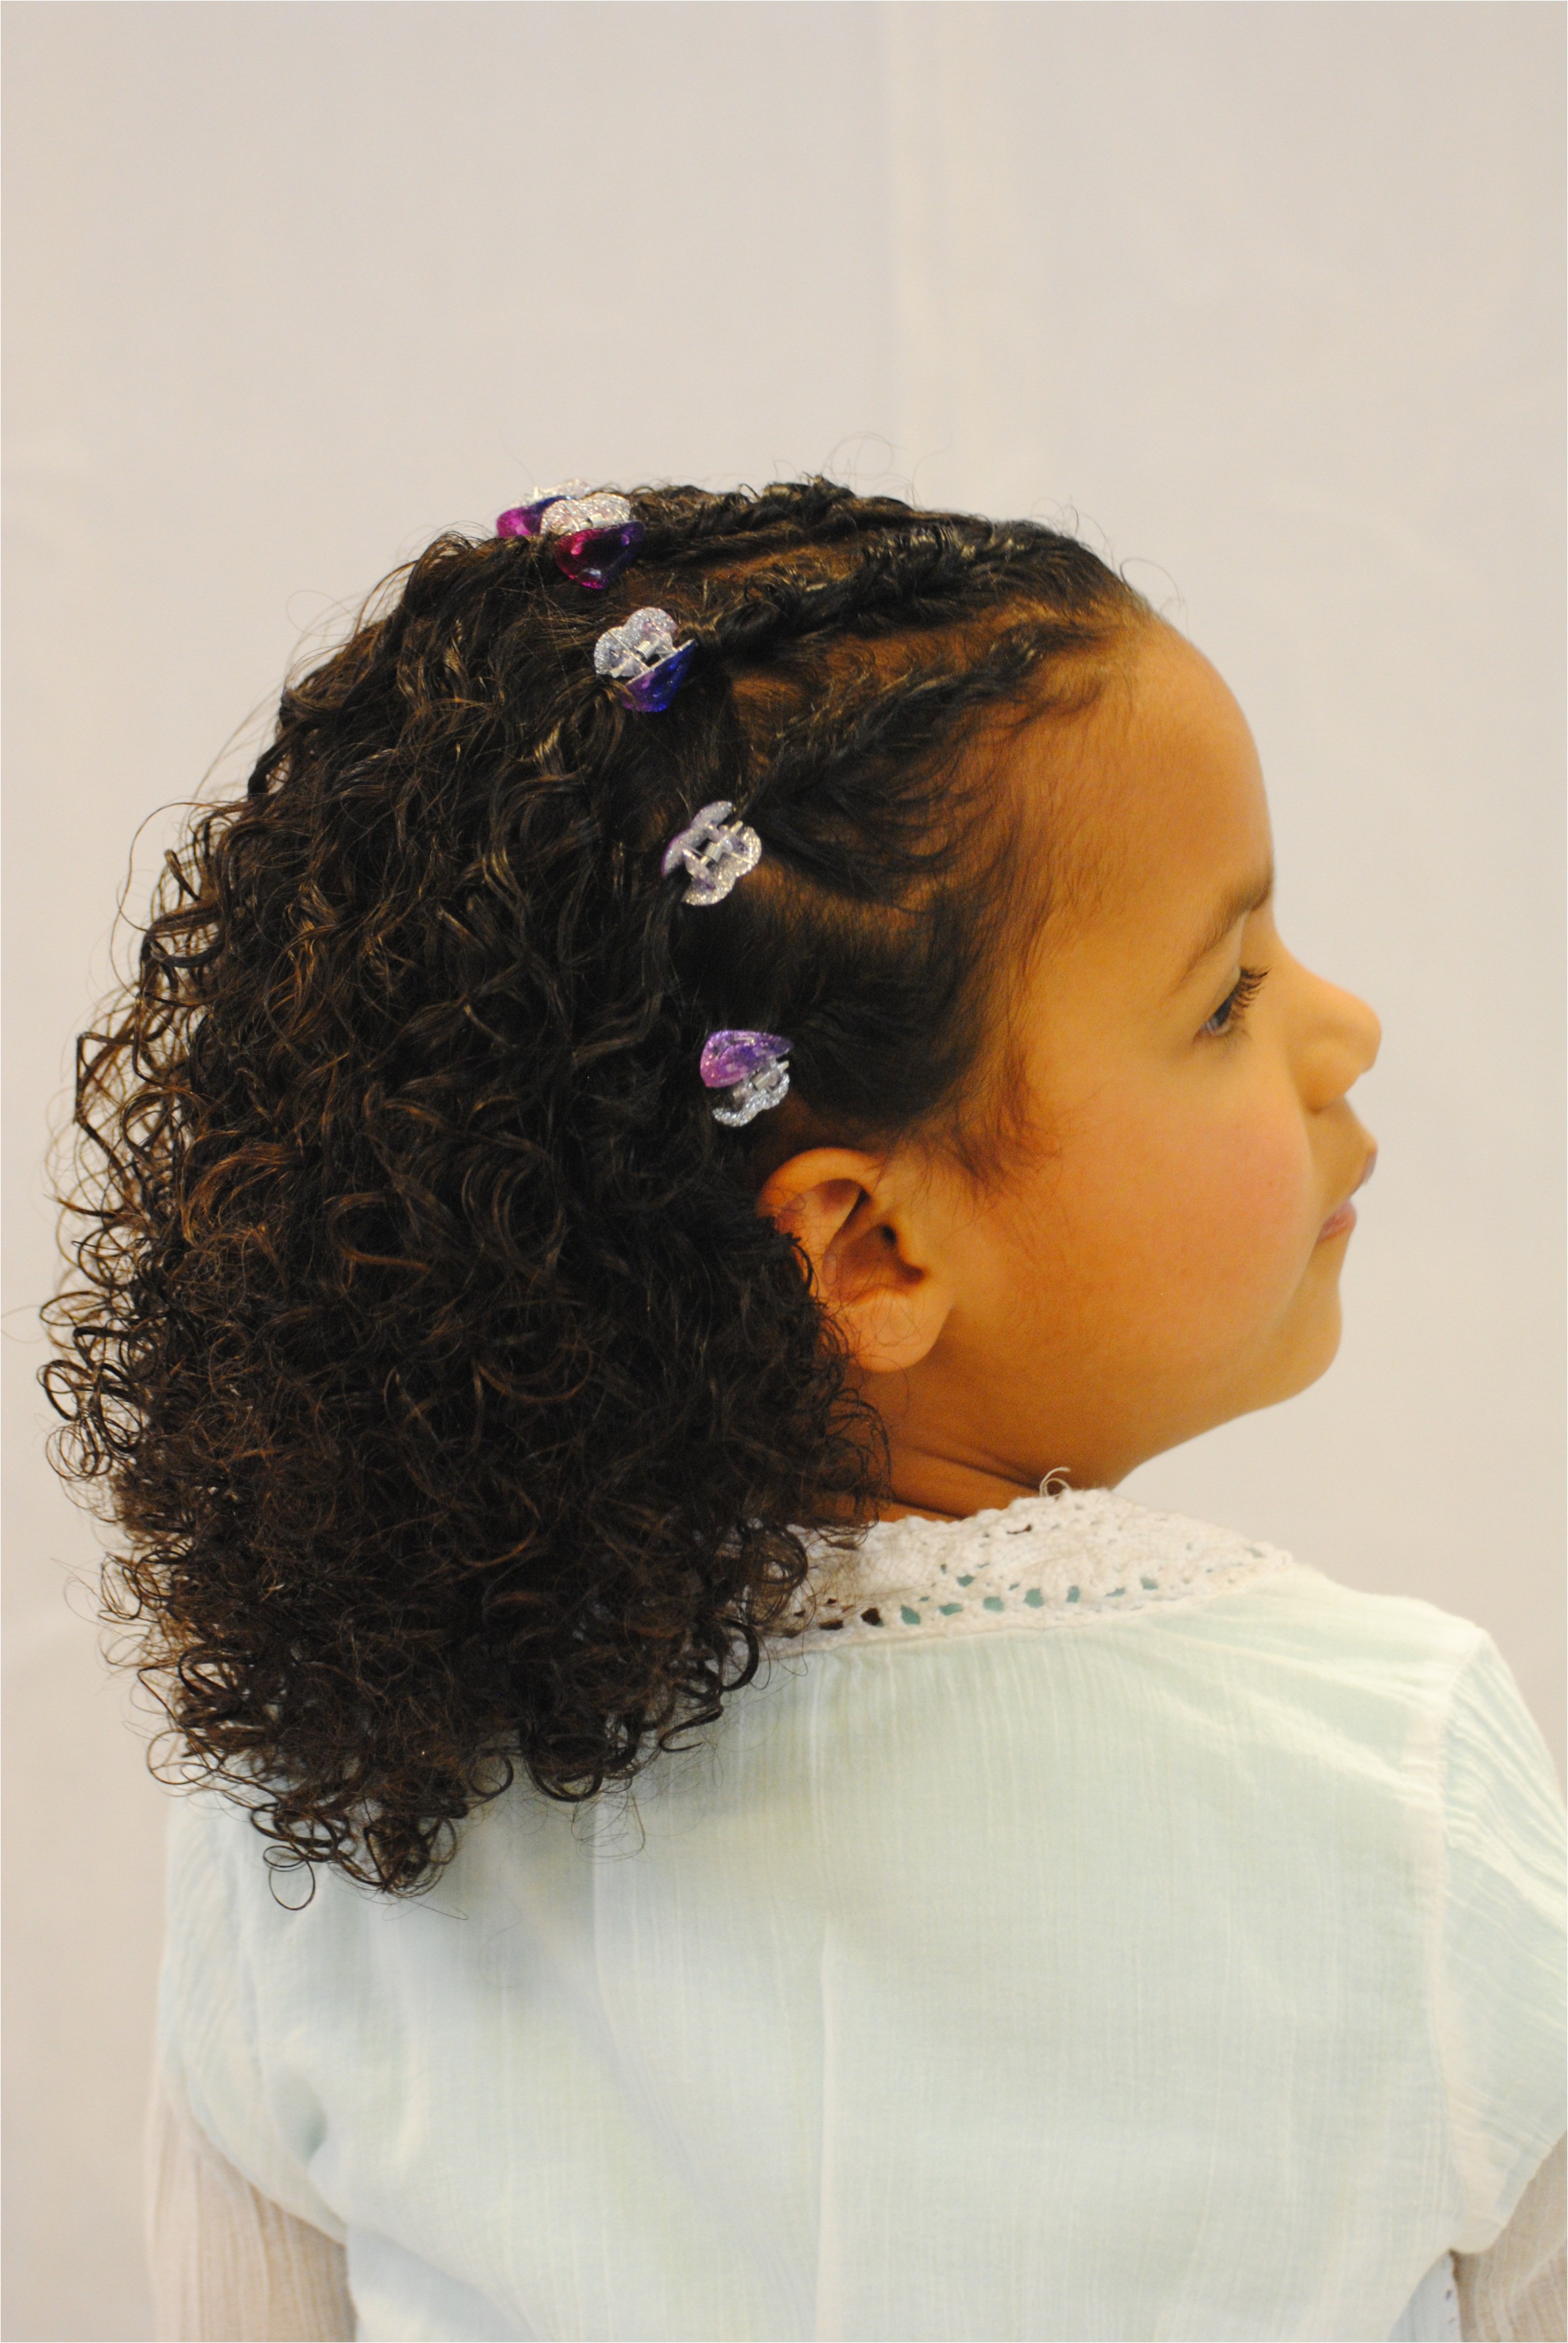 Inspirational Mixed Little Girl Hairstyle Beautiful 2 Year Old Black Girl